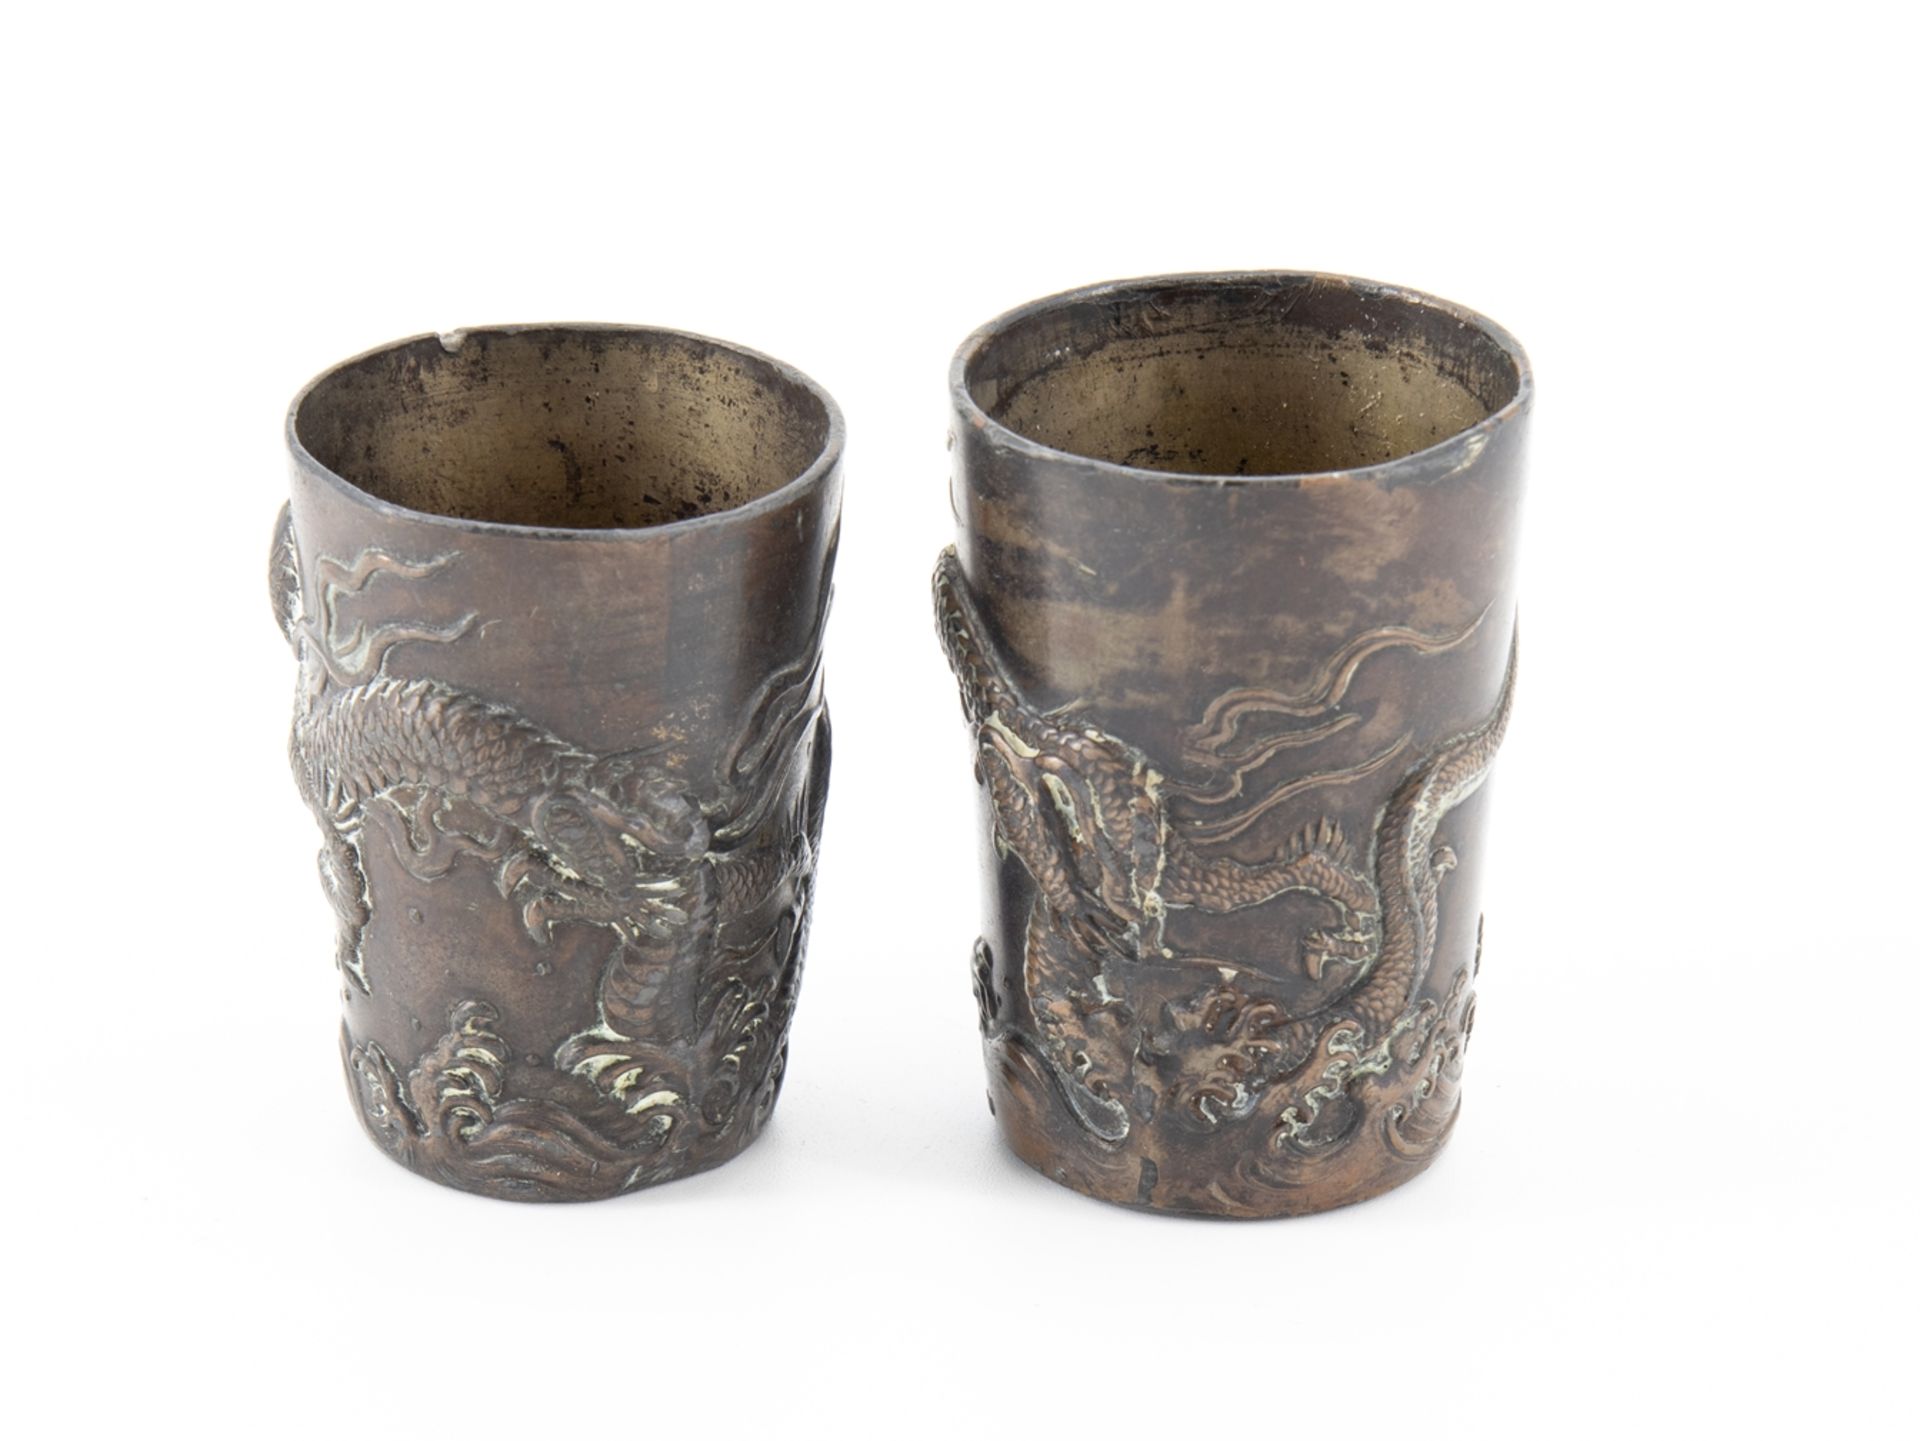 4 cups with dragon motif, China, around 1900 - Image 9 of 12